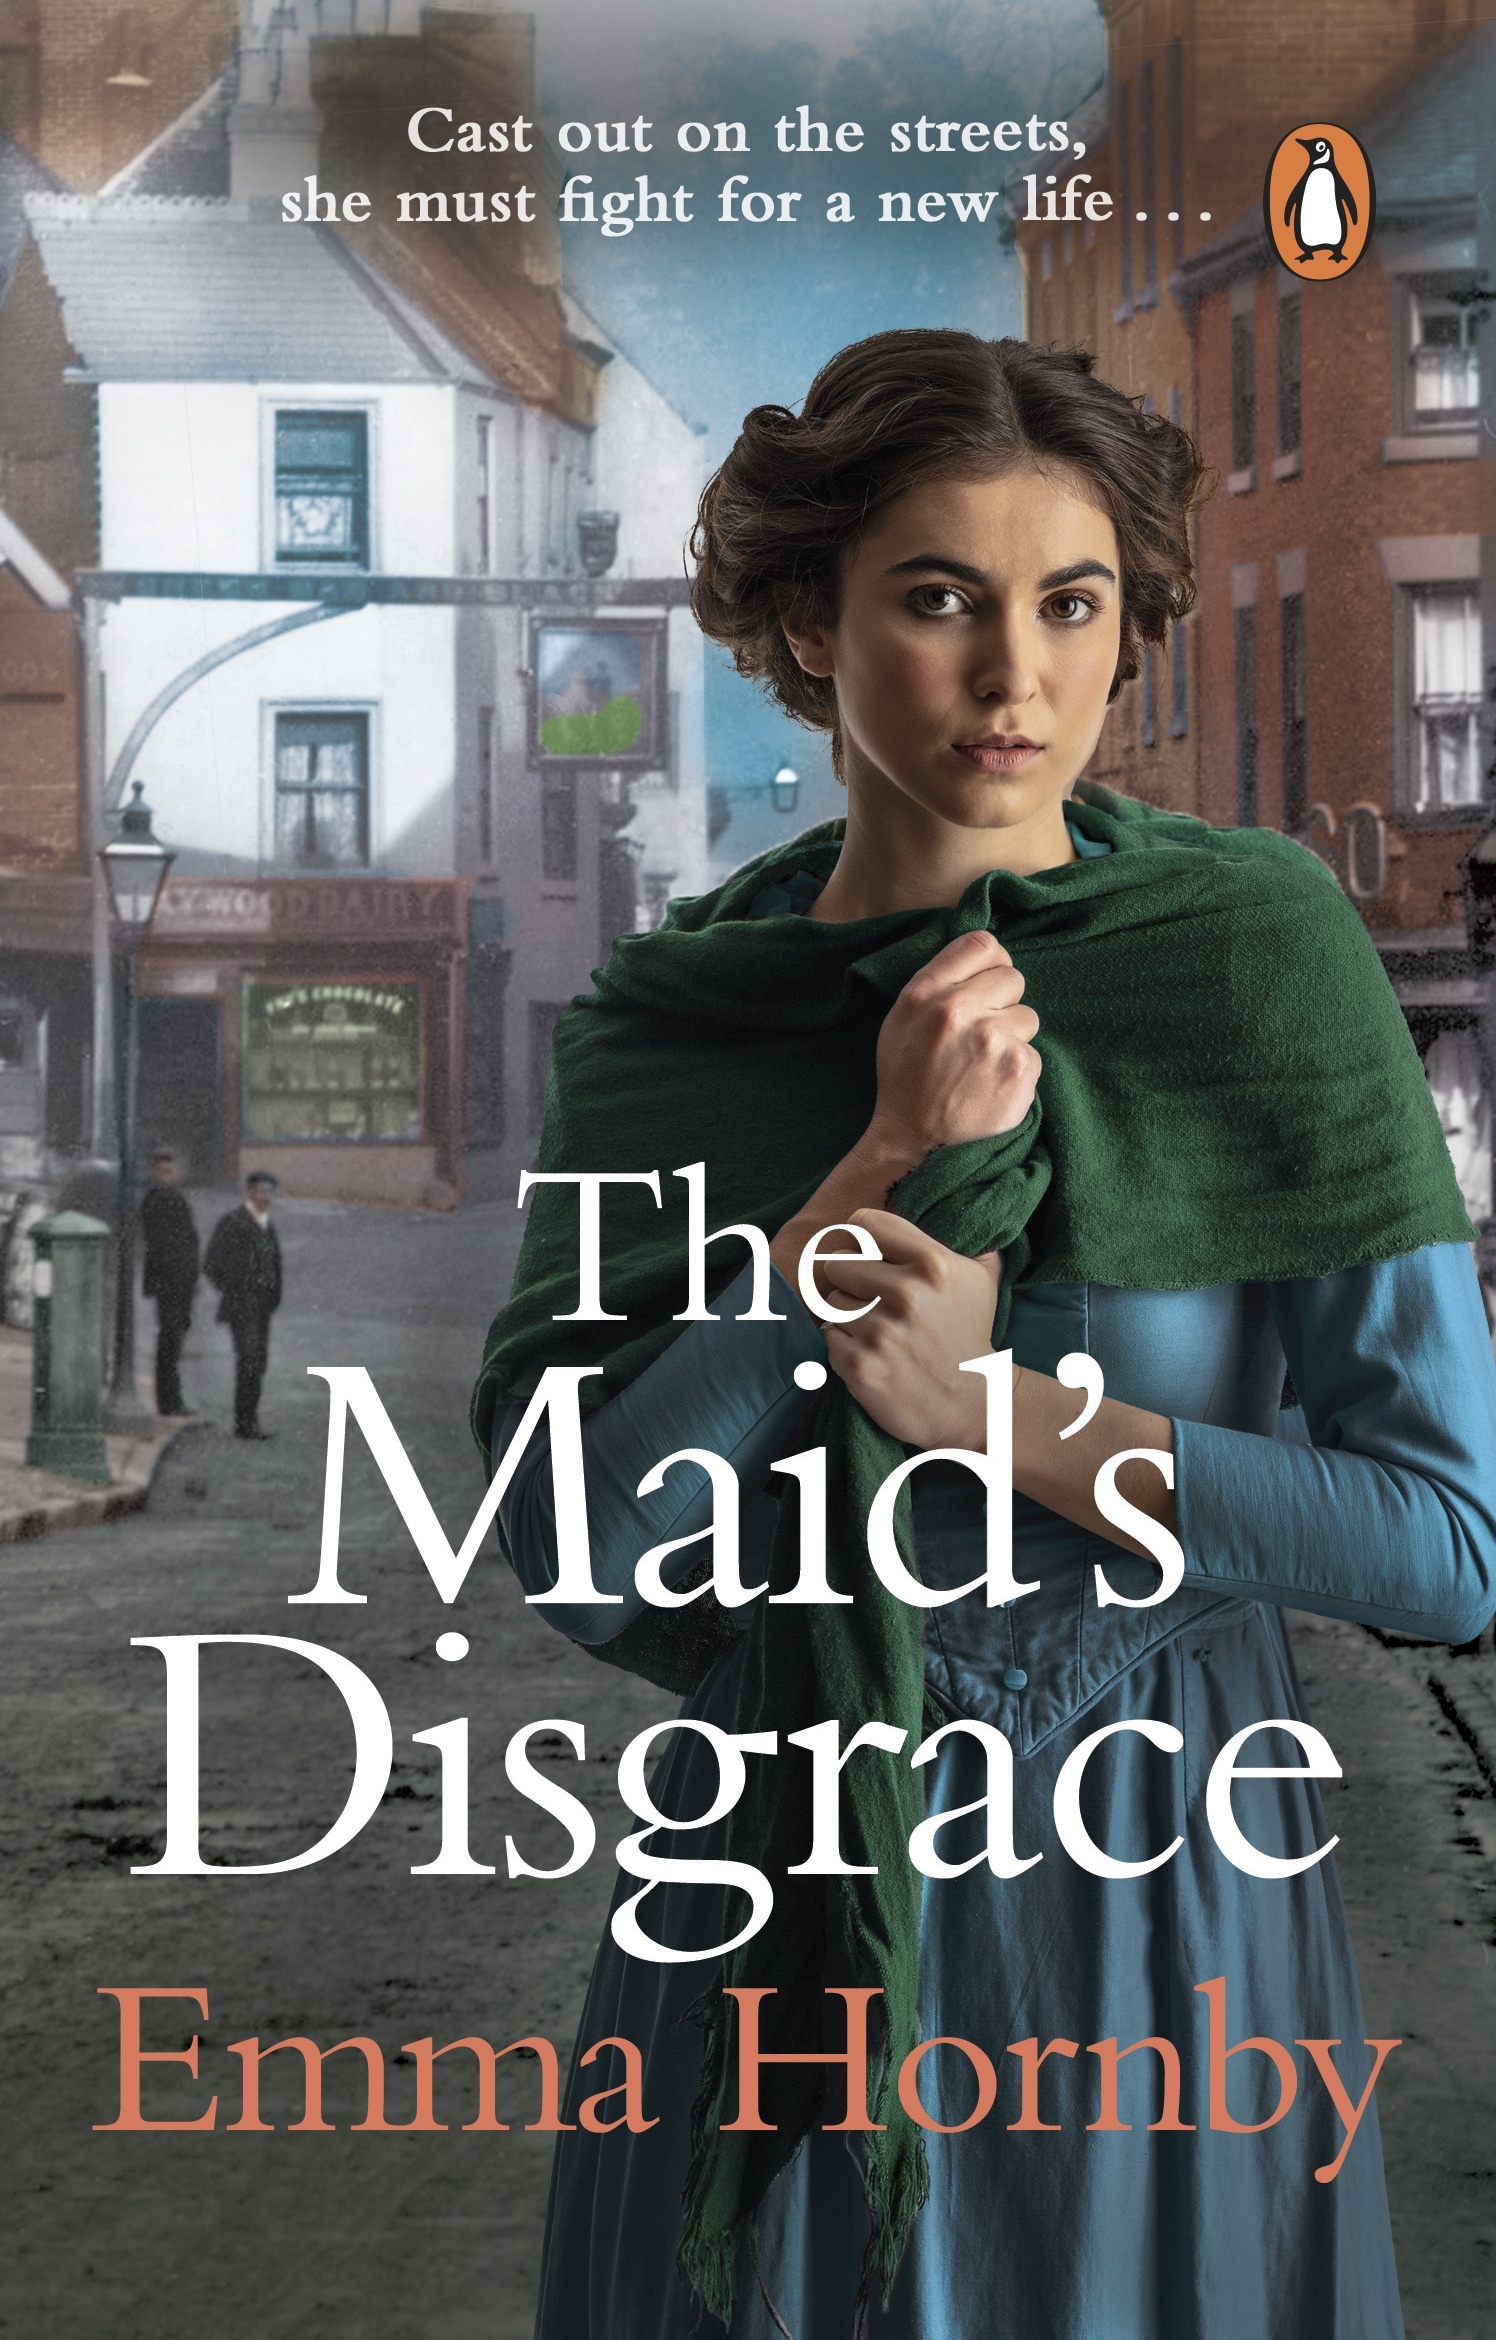 The Maid’s Disgrace